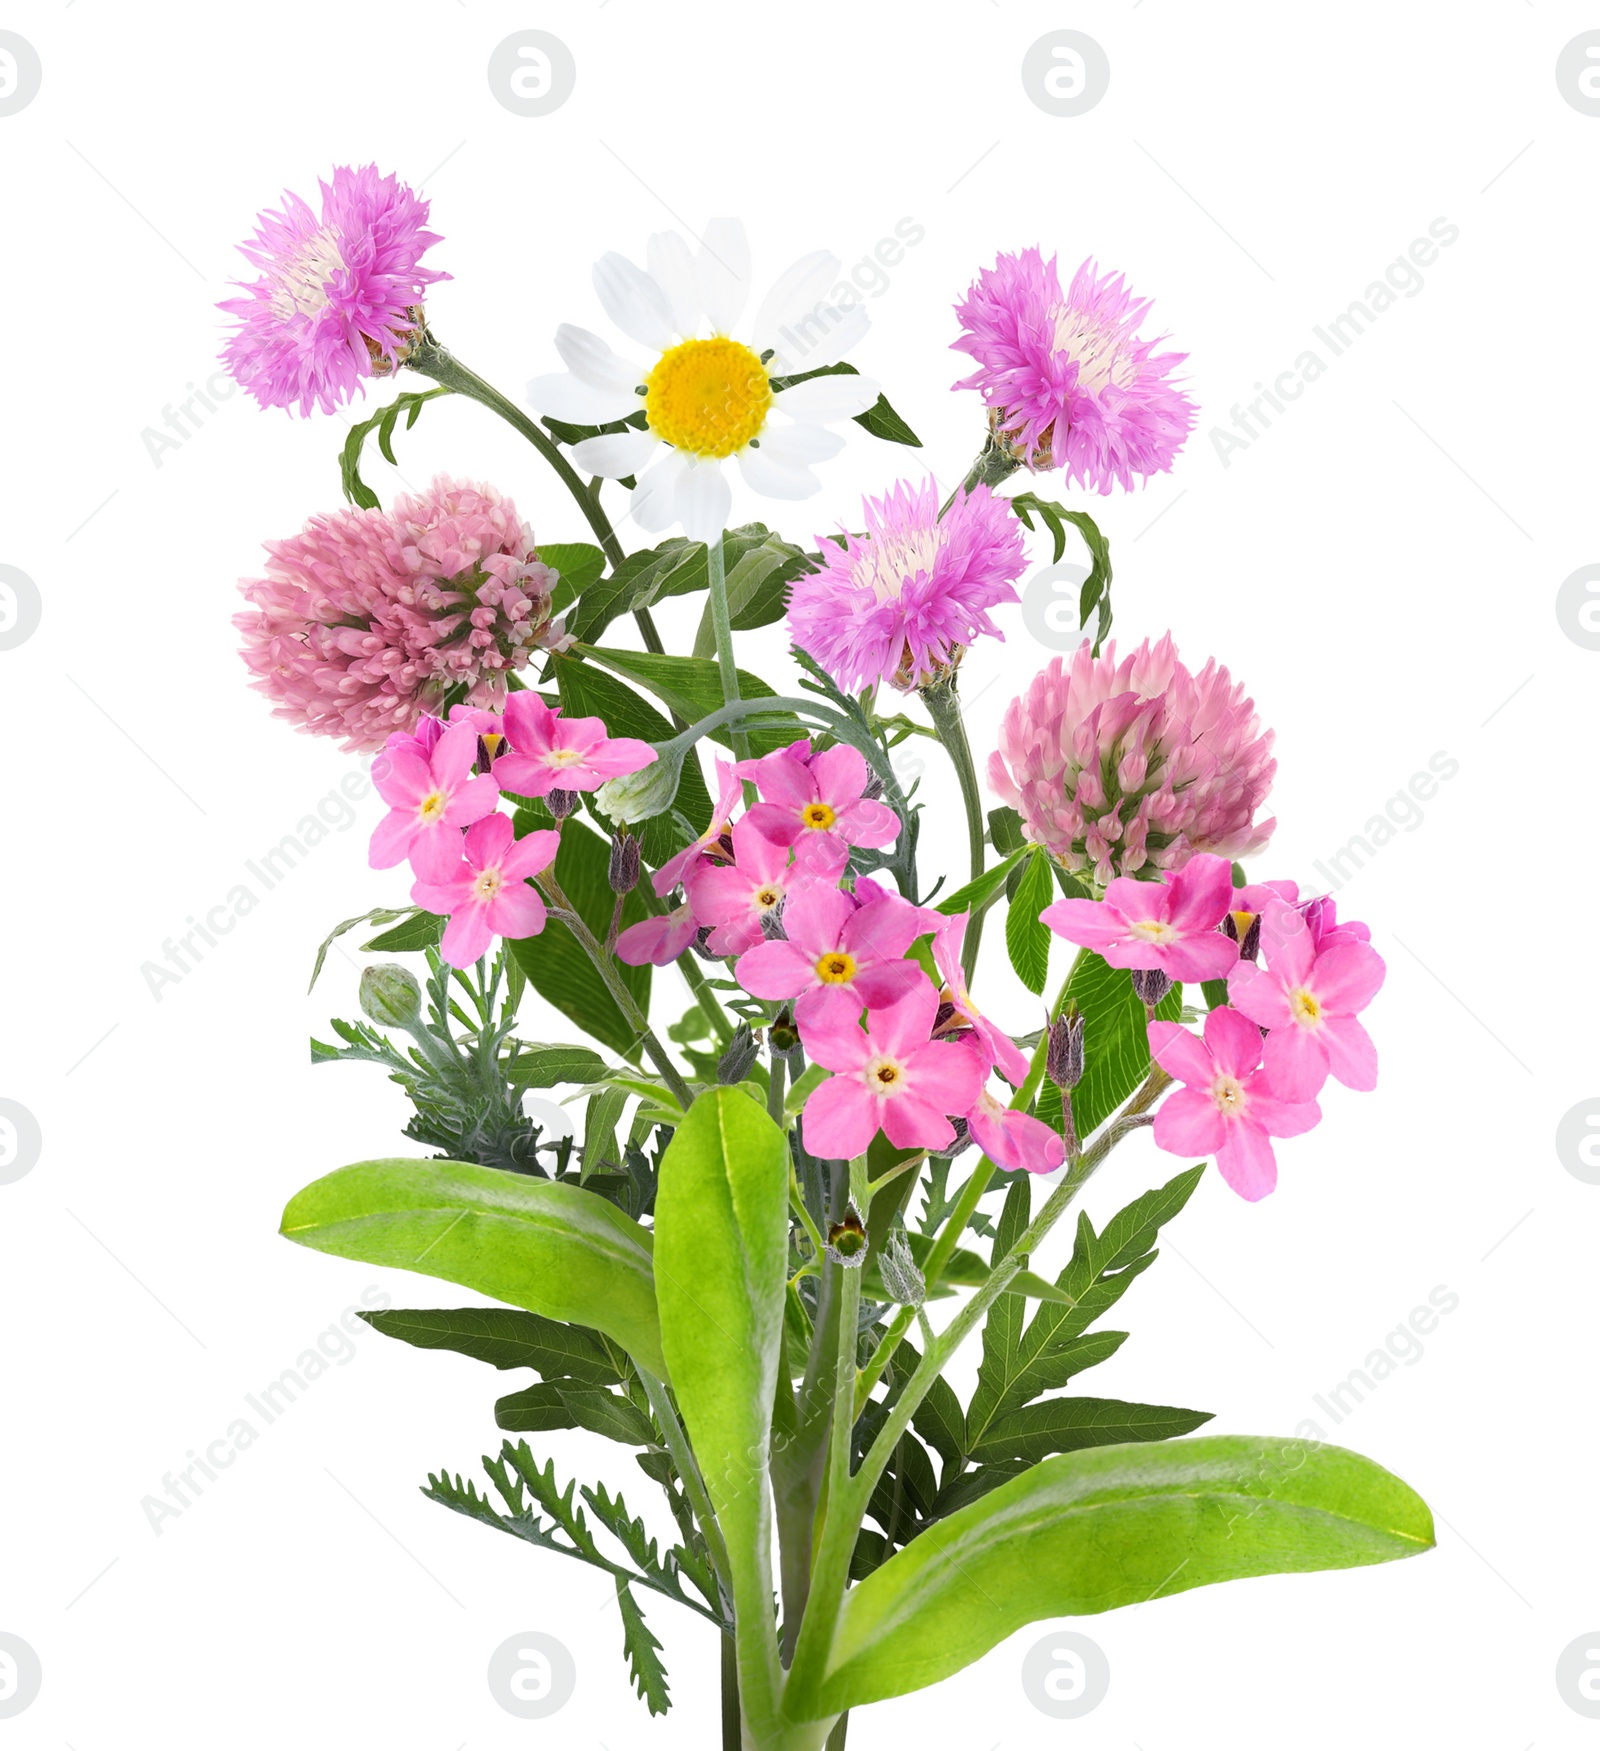 Image of Bouquet of beautiful meadow flowers isolated on white